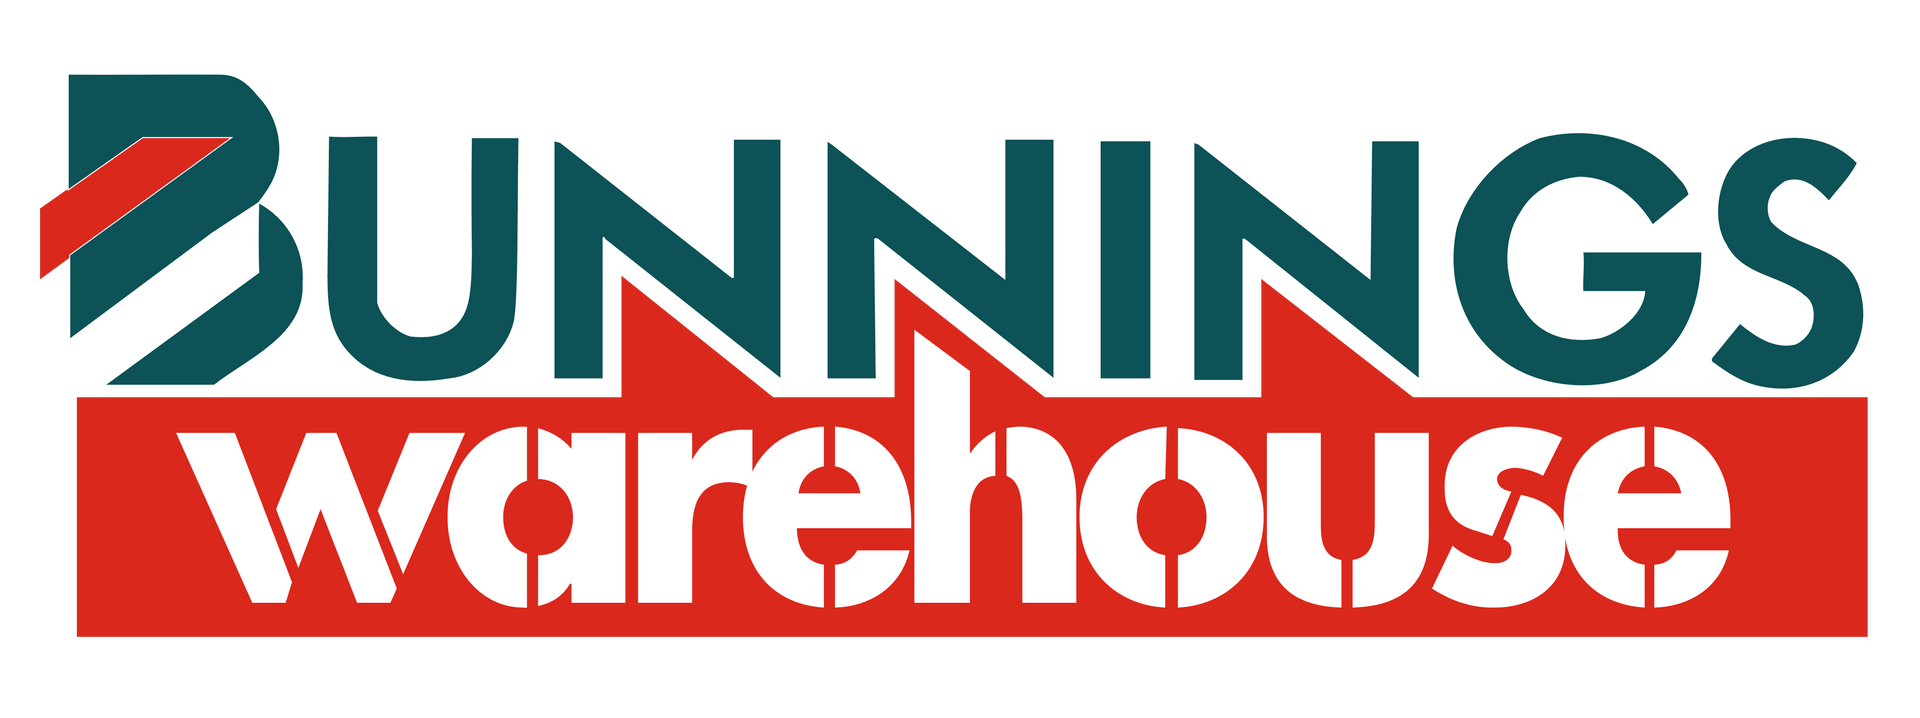 A bunnings warehouse logo on a white background.